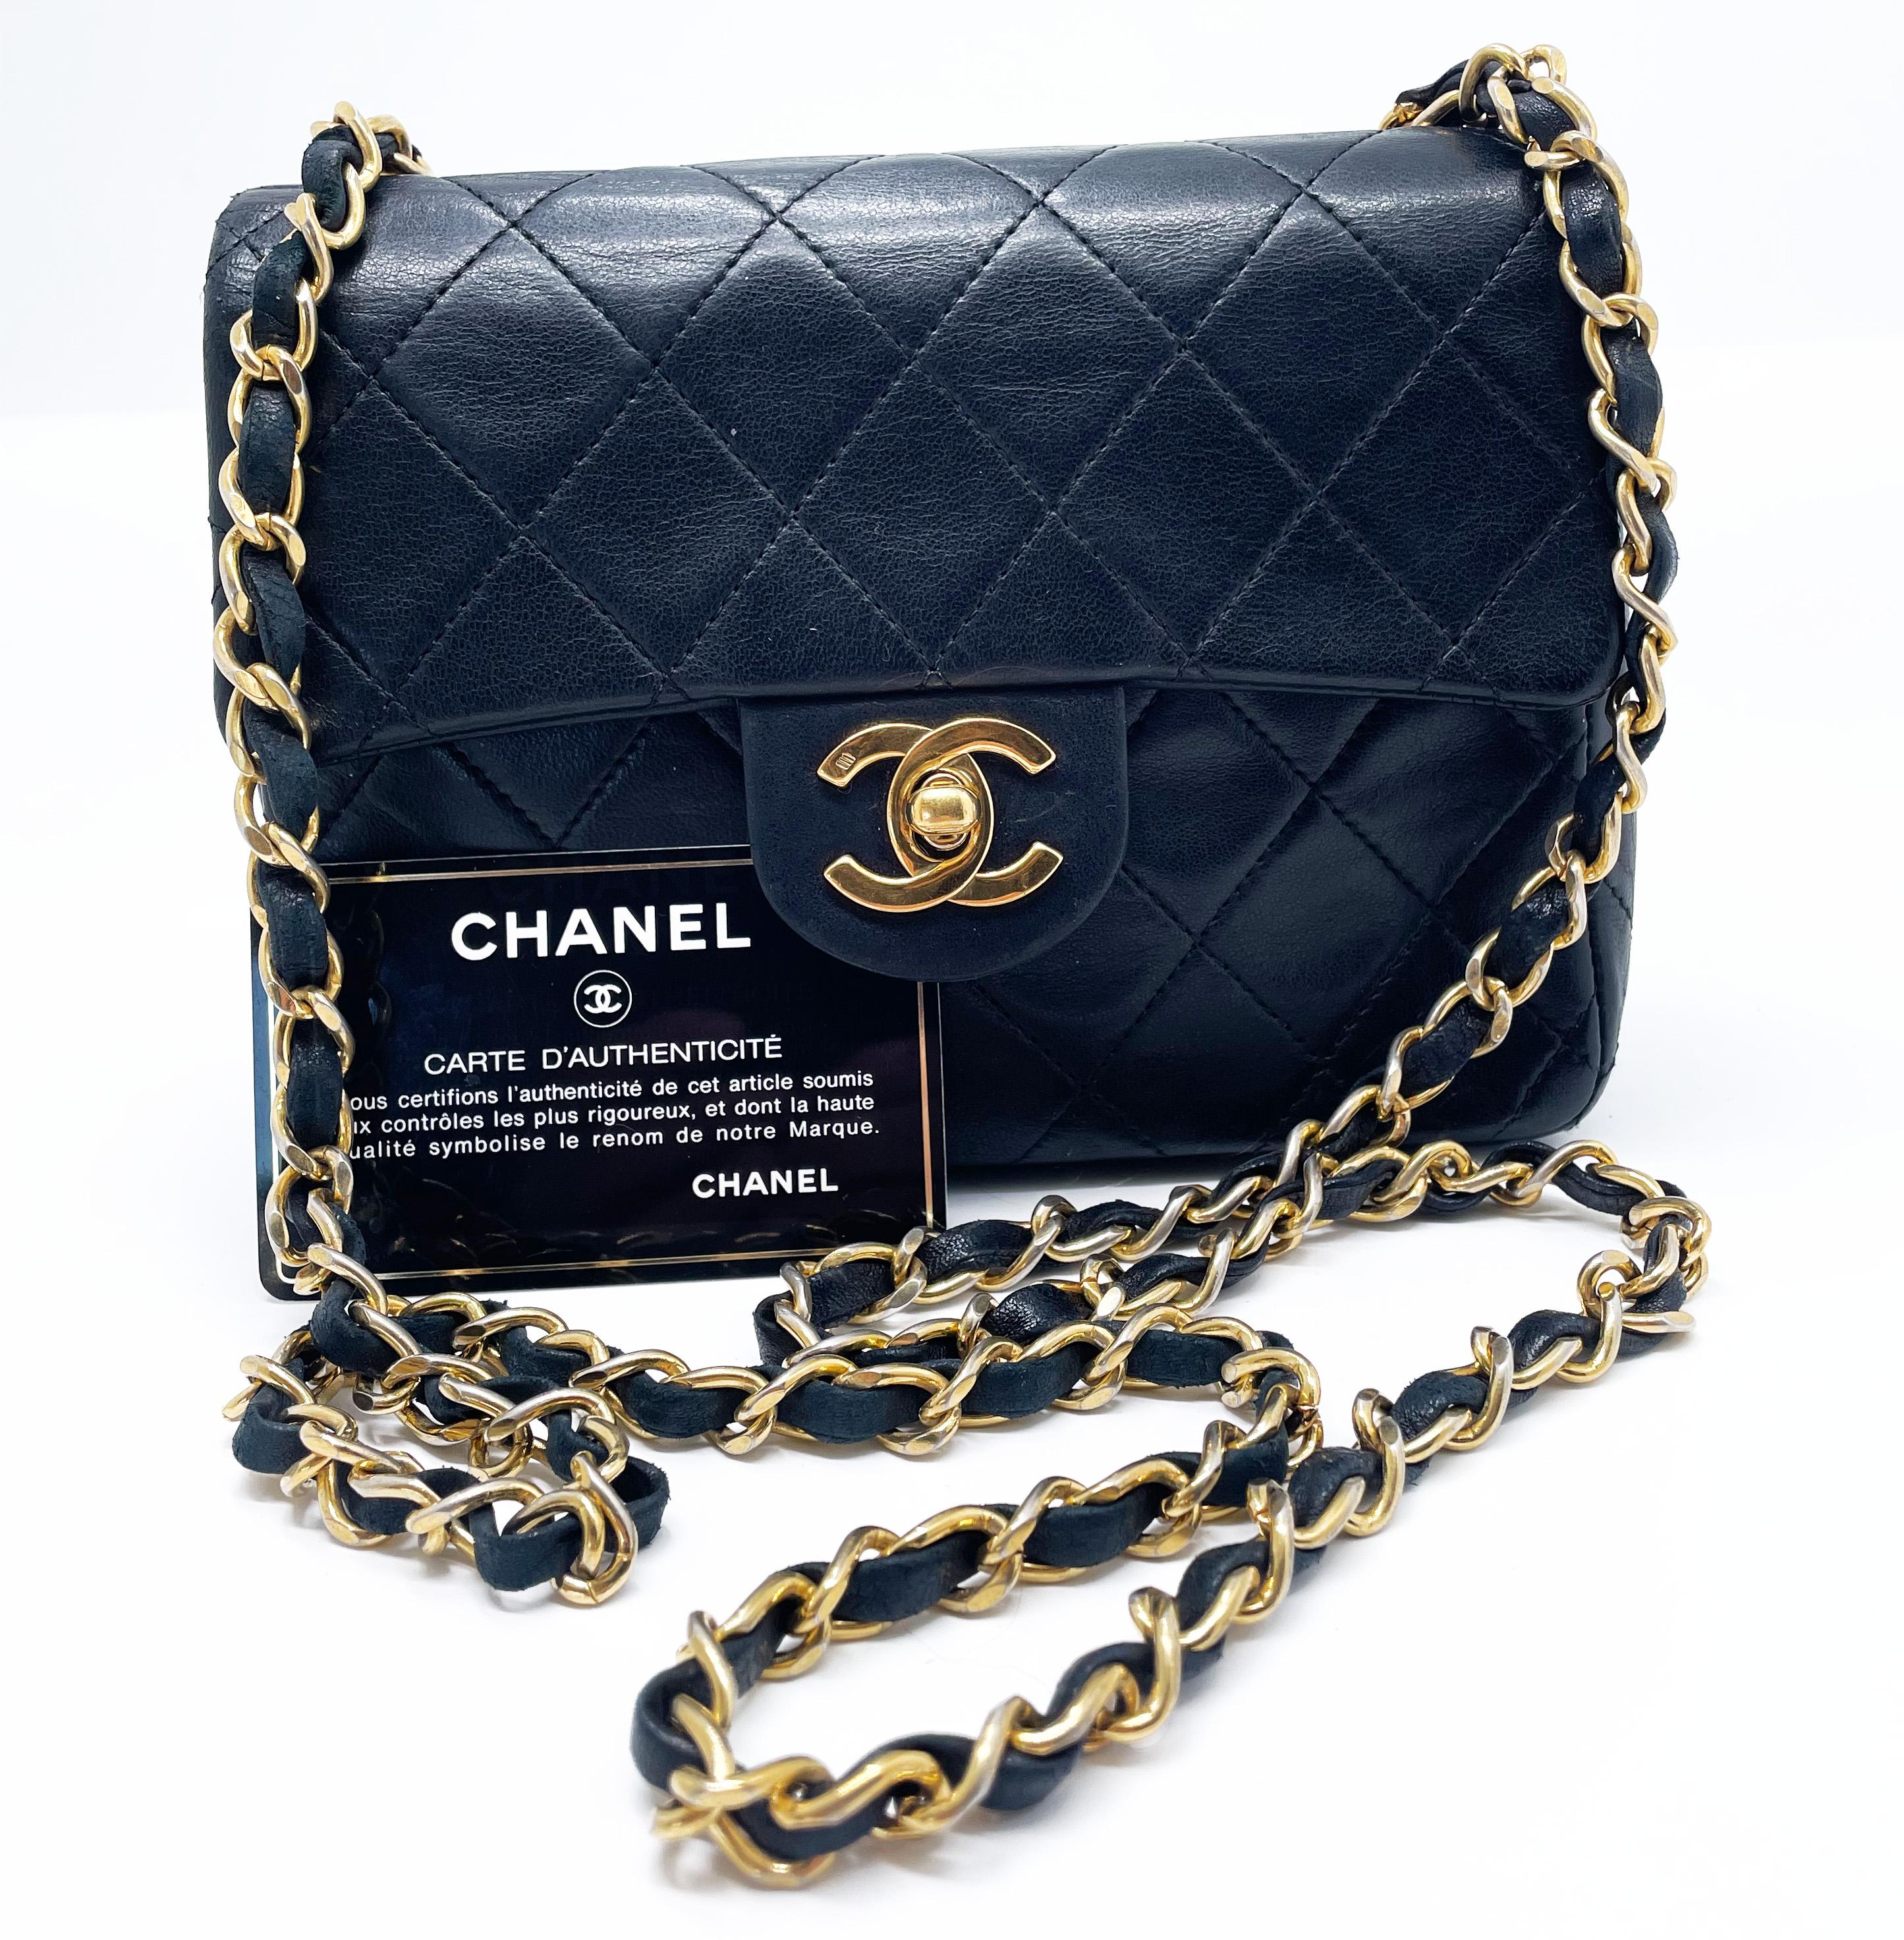 Chanel Mini Timeless handbag in black quilted leather, gold metal hardware, gold metal chain strap interwoven with black leather allowing it to be worn on the shoulder or across the body. Flap closure. A patch pocket on the back of the bag. Interior